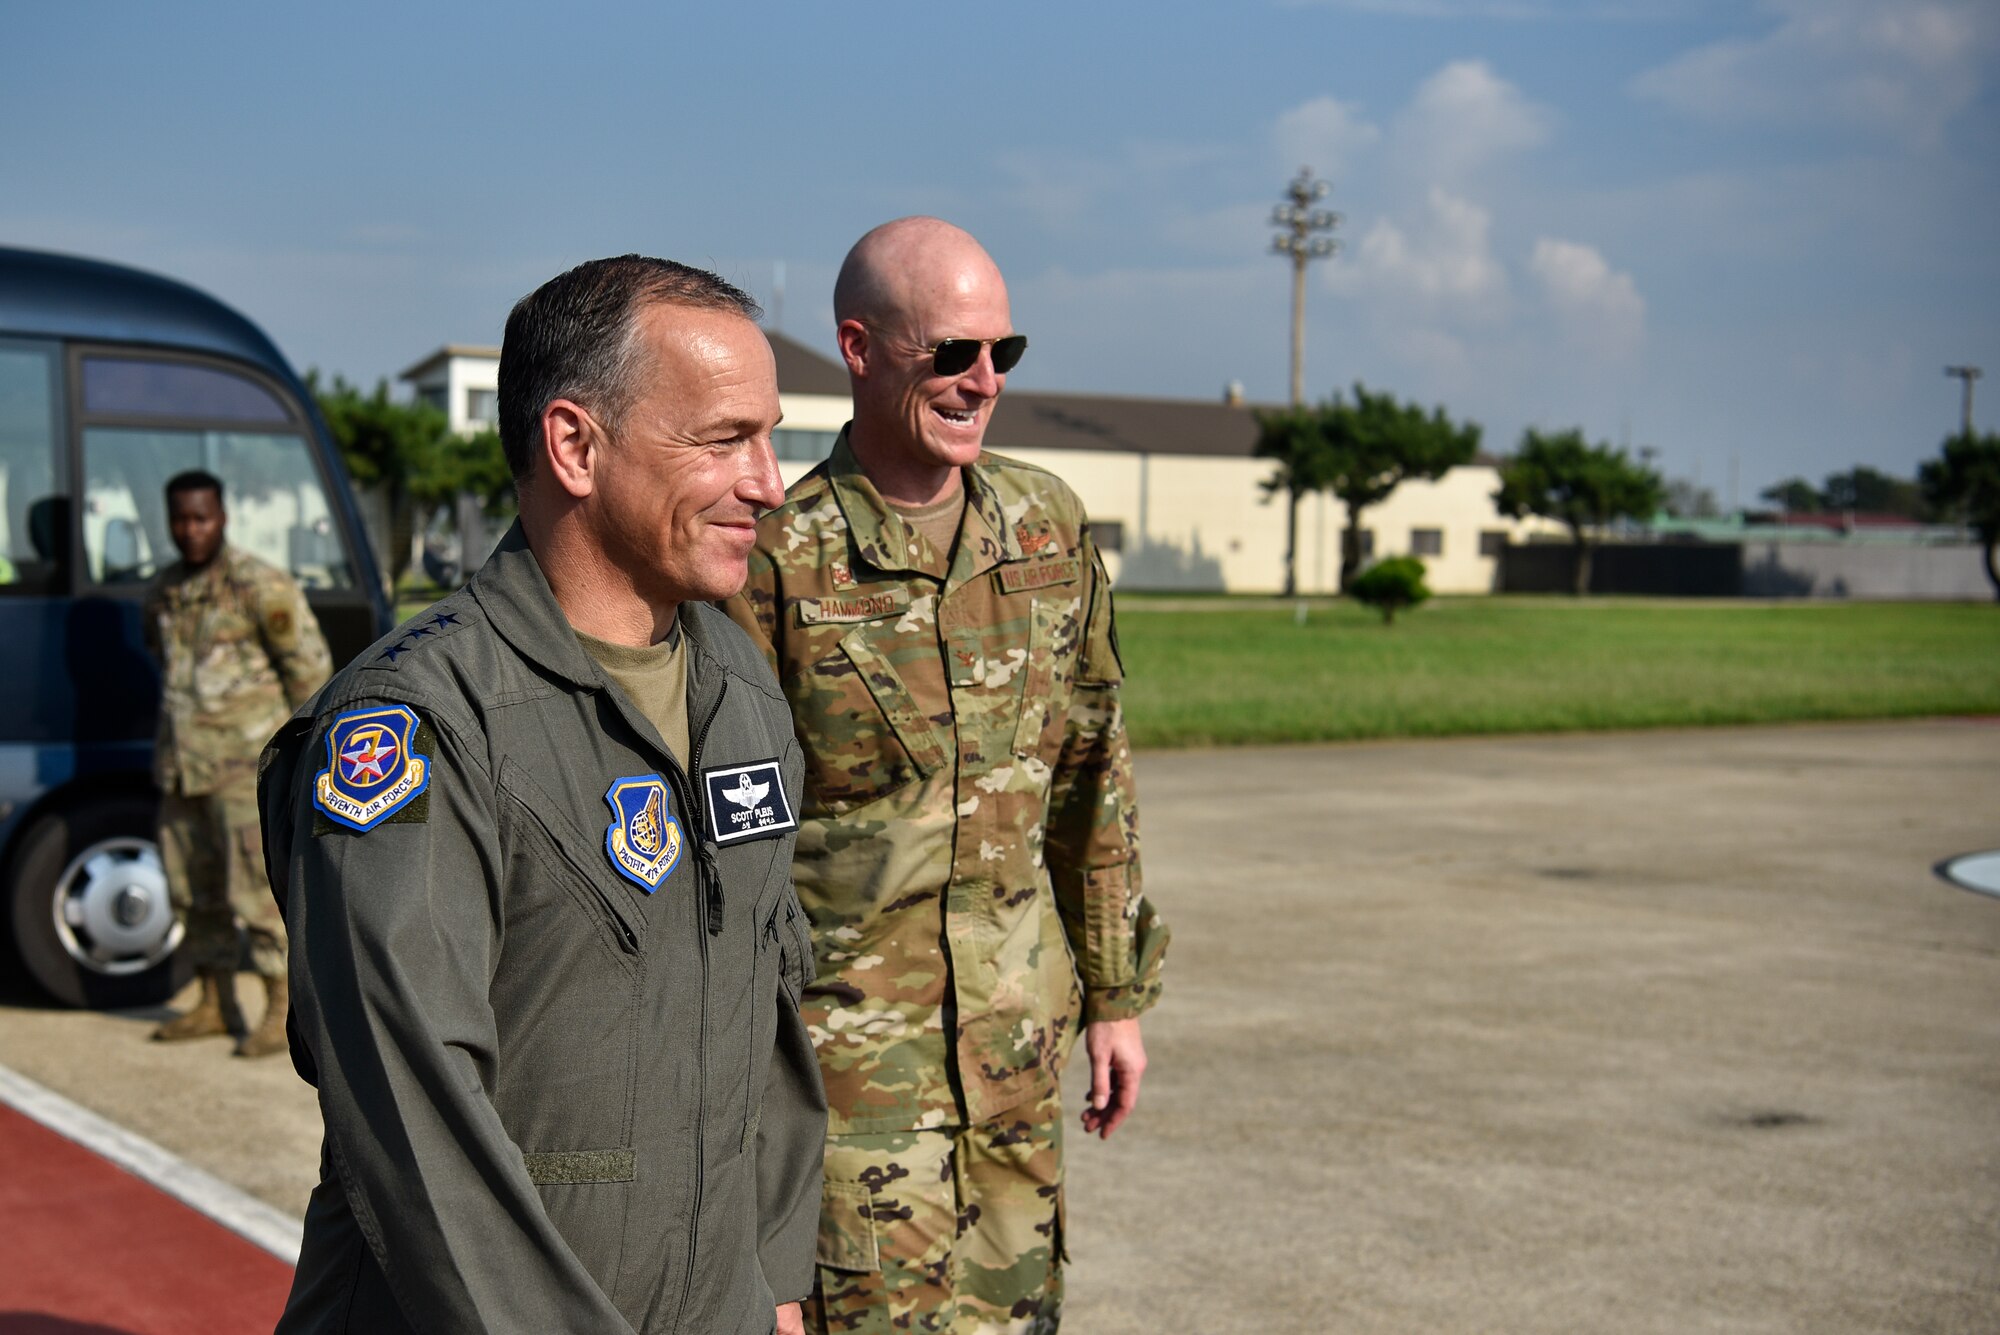 A photo of two commanders walking.